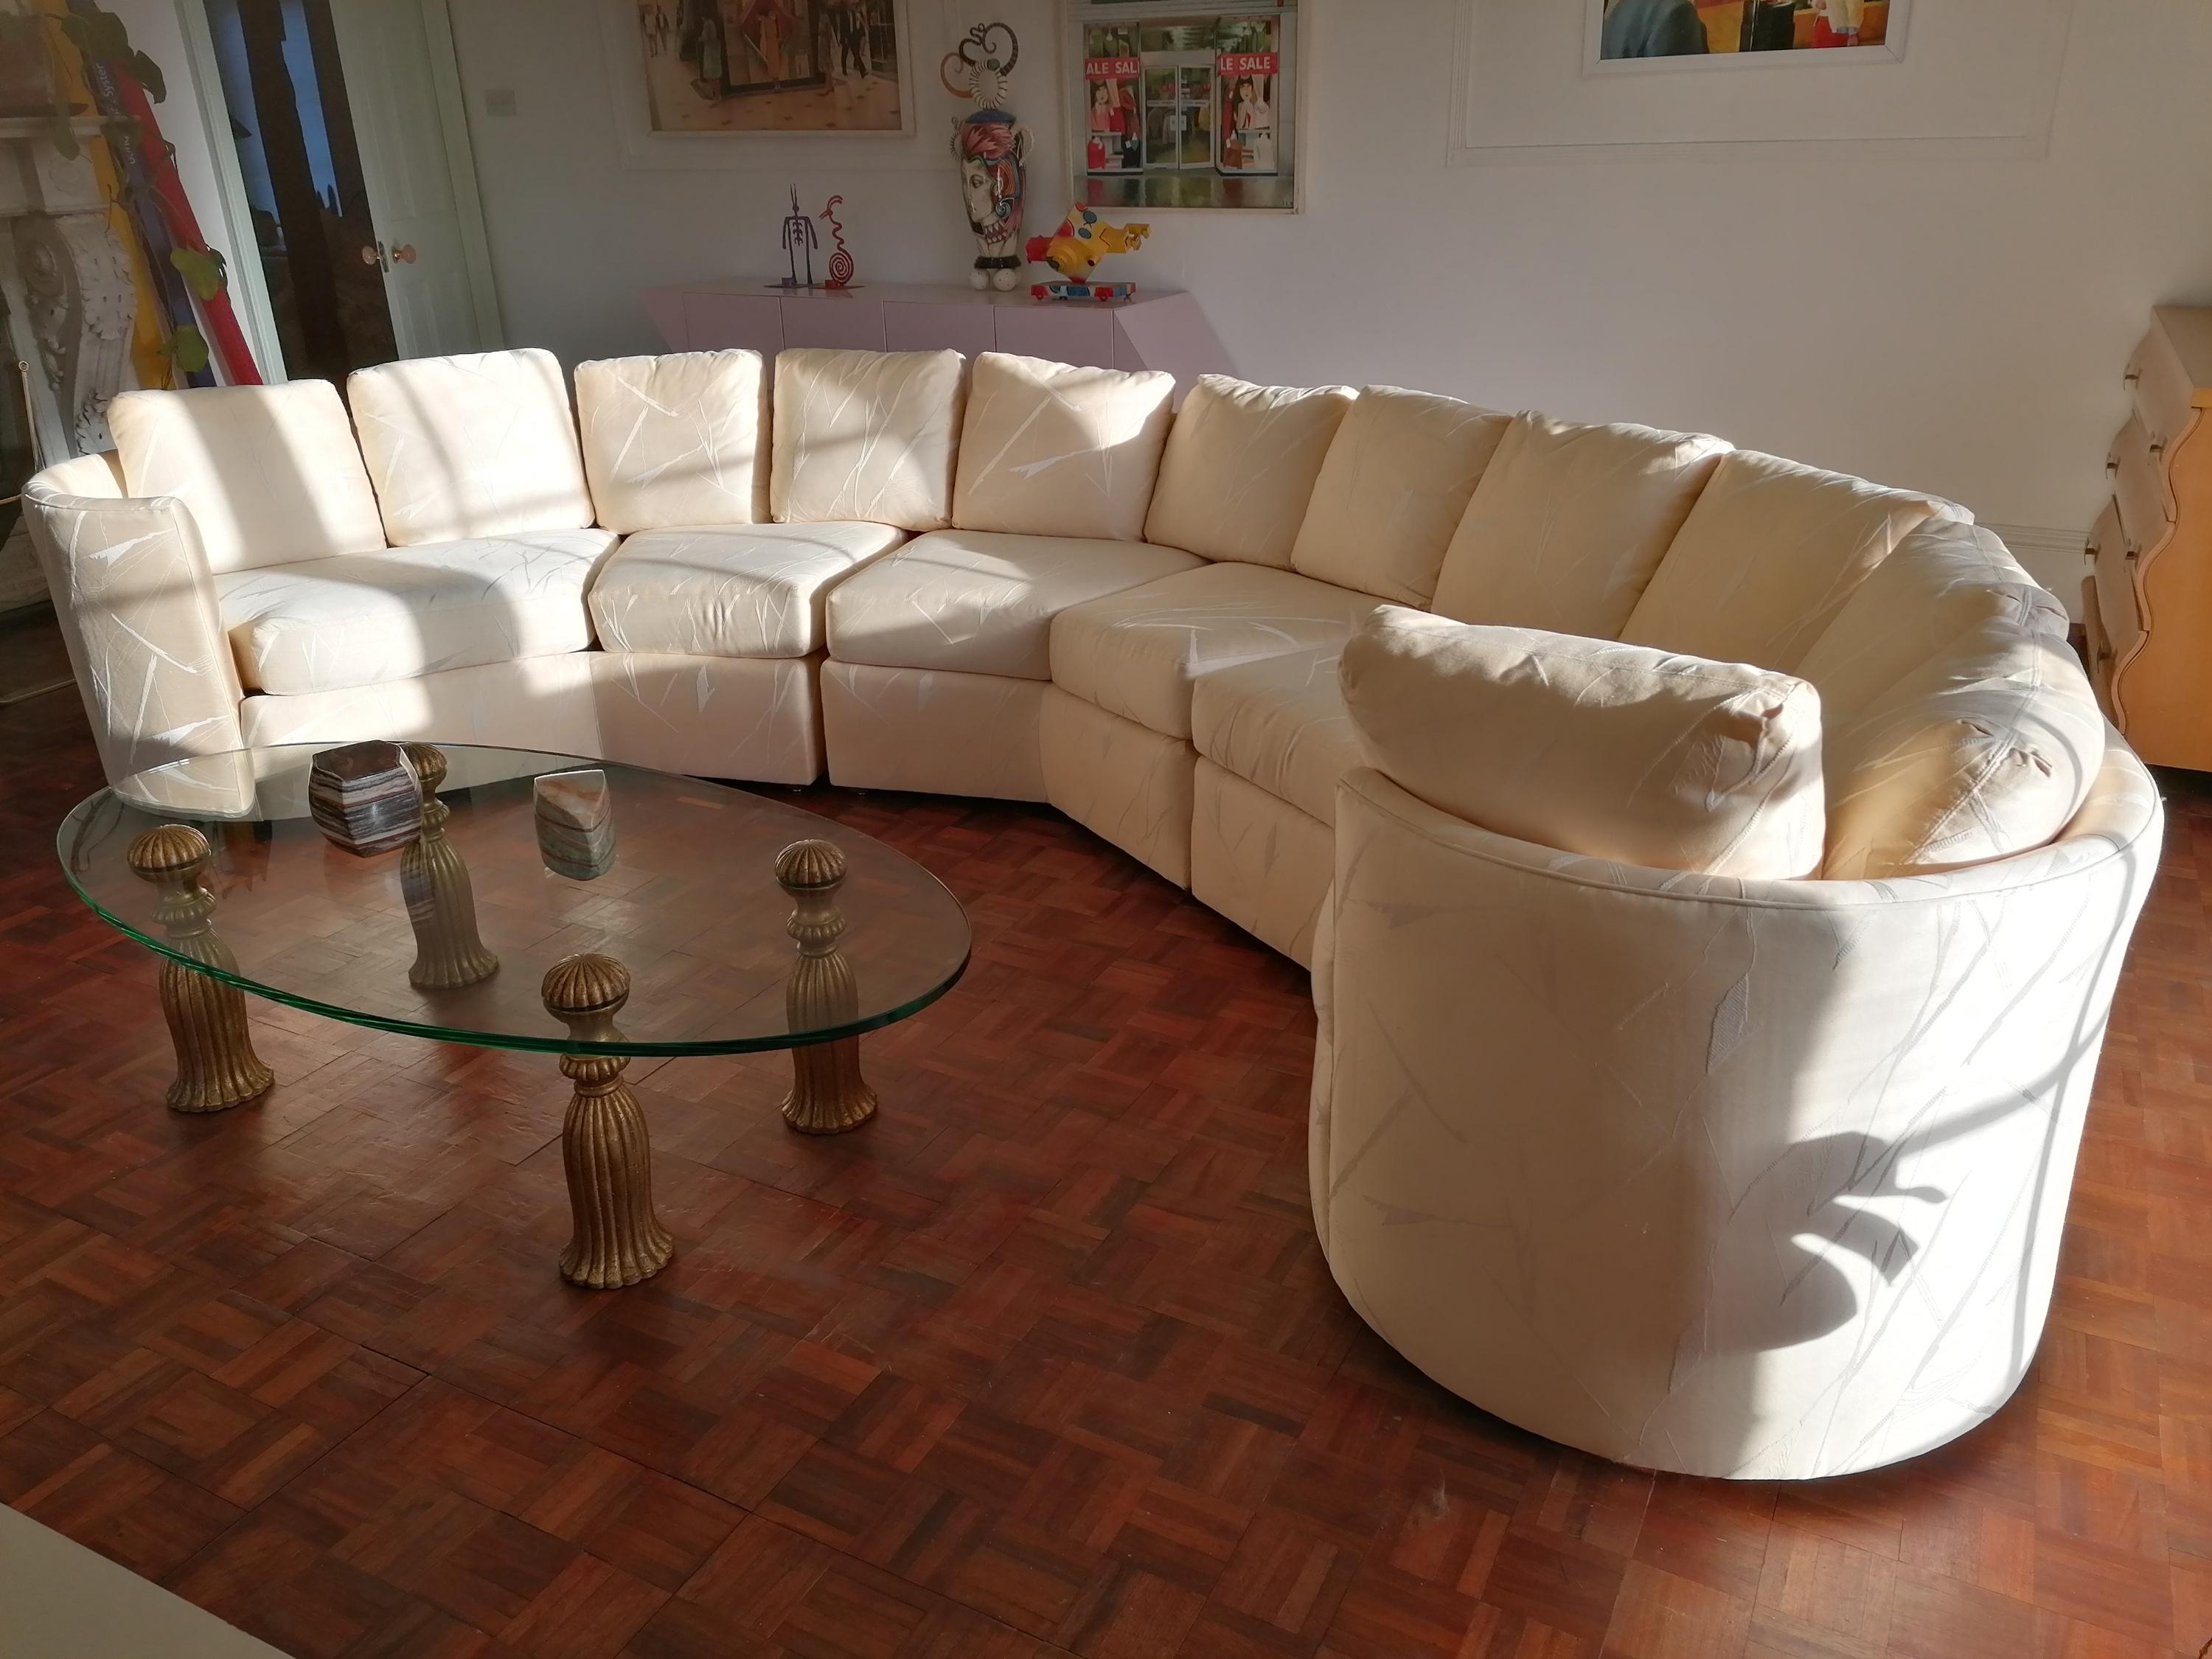 Large sectional sofa by Dansen Contemporary, USA 1984. Comprising 3 angled & curved sections which form a gentle arc. In excellent condition- looks barely used. The heavy duty cream cotton type fabric has embroidered pale cream abstract motifs. A